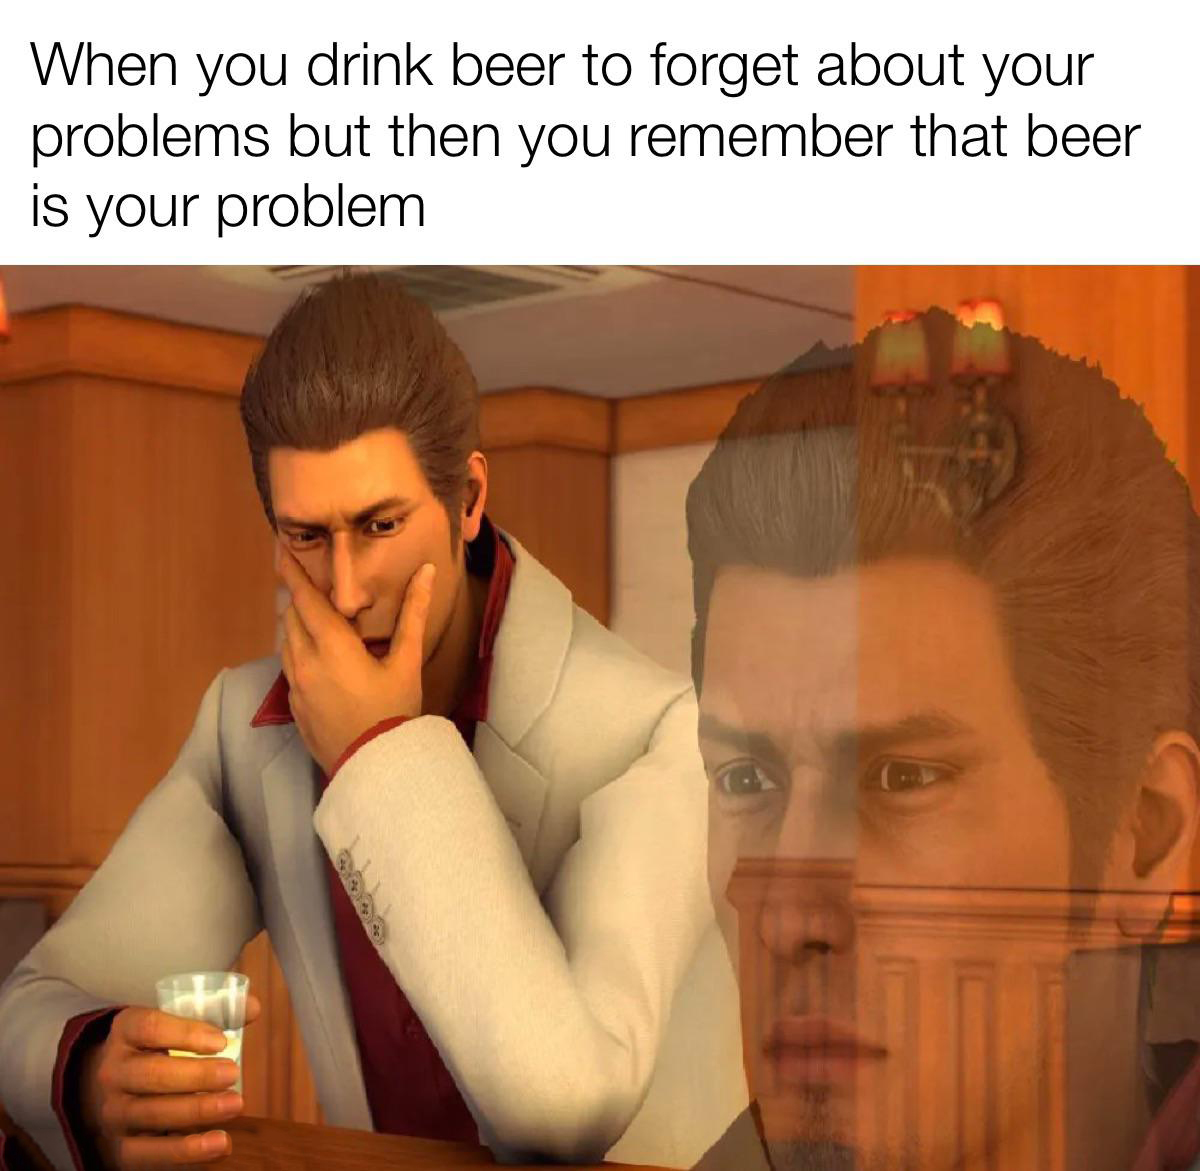 daily dose of pics and memes - Funny meme - When you drink beer to forget about your problems but then you remember that beer is your problem